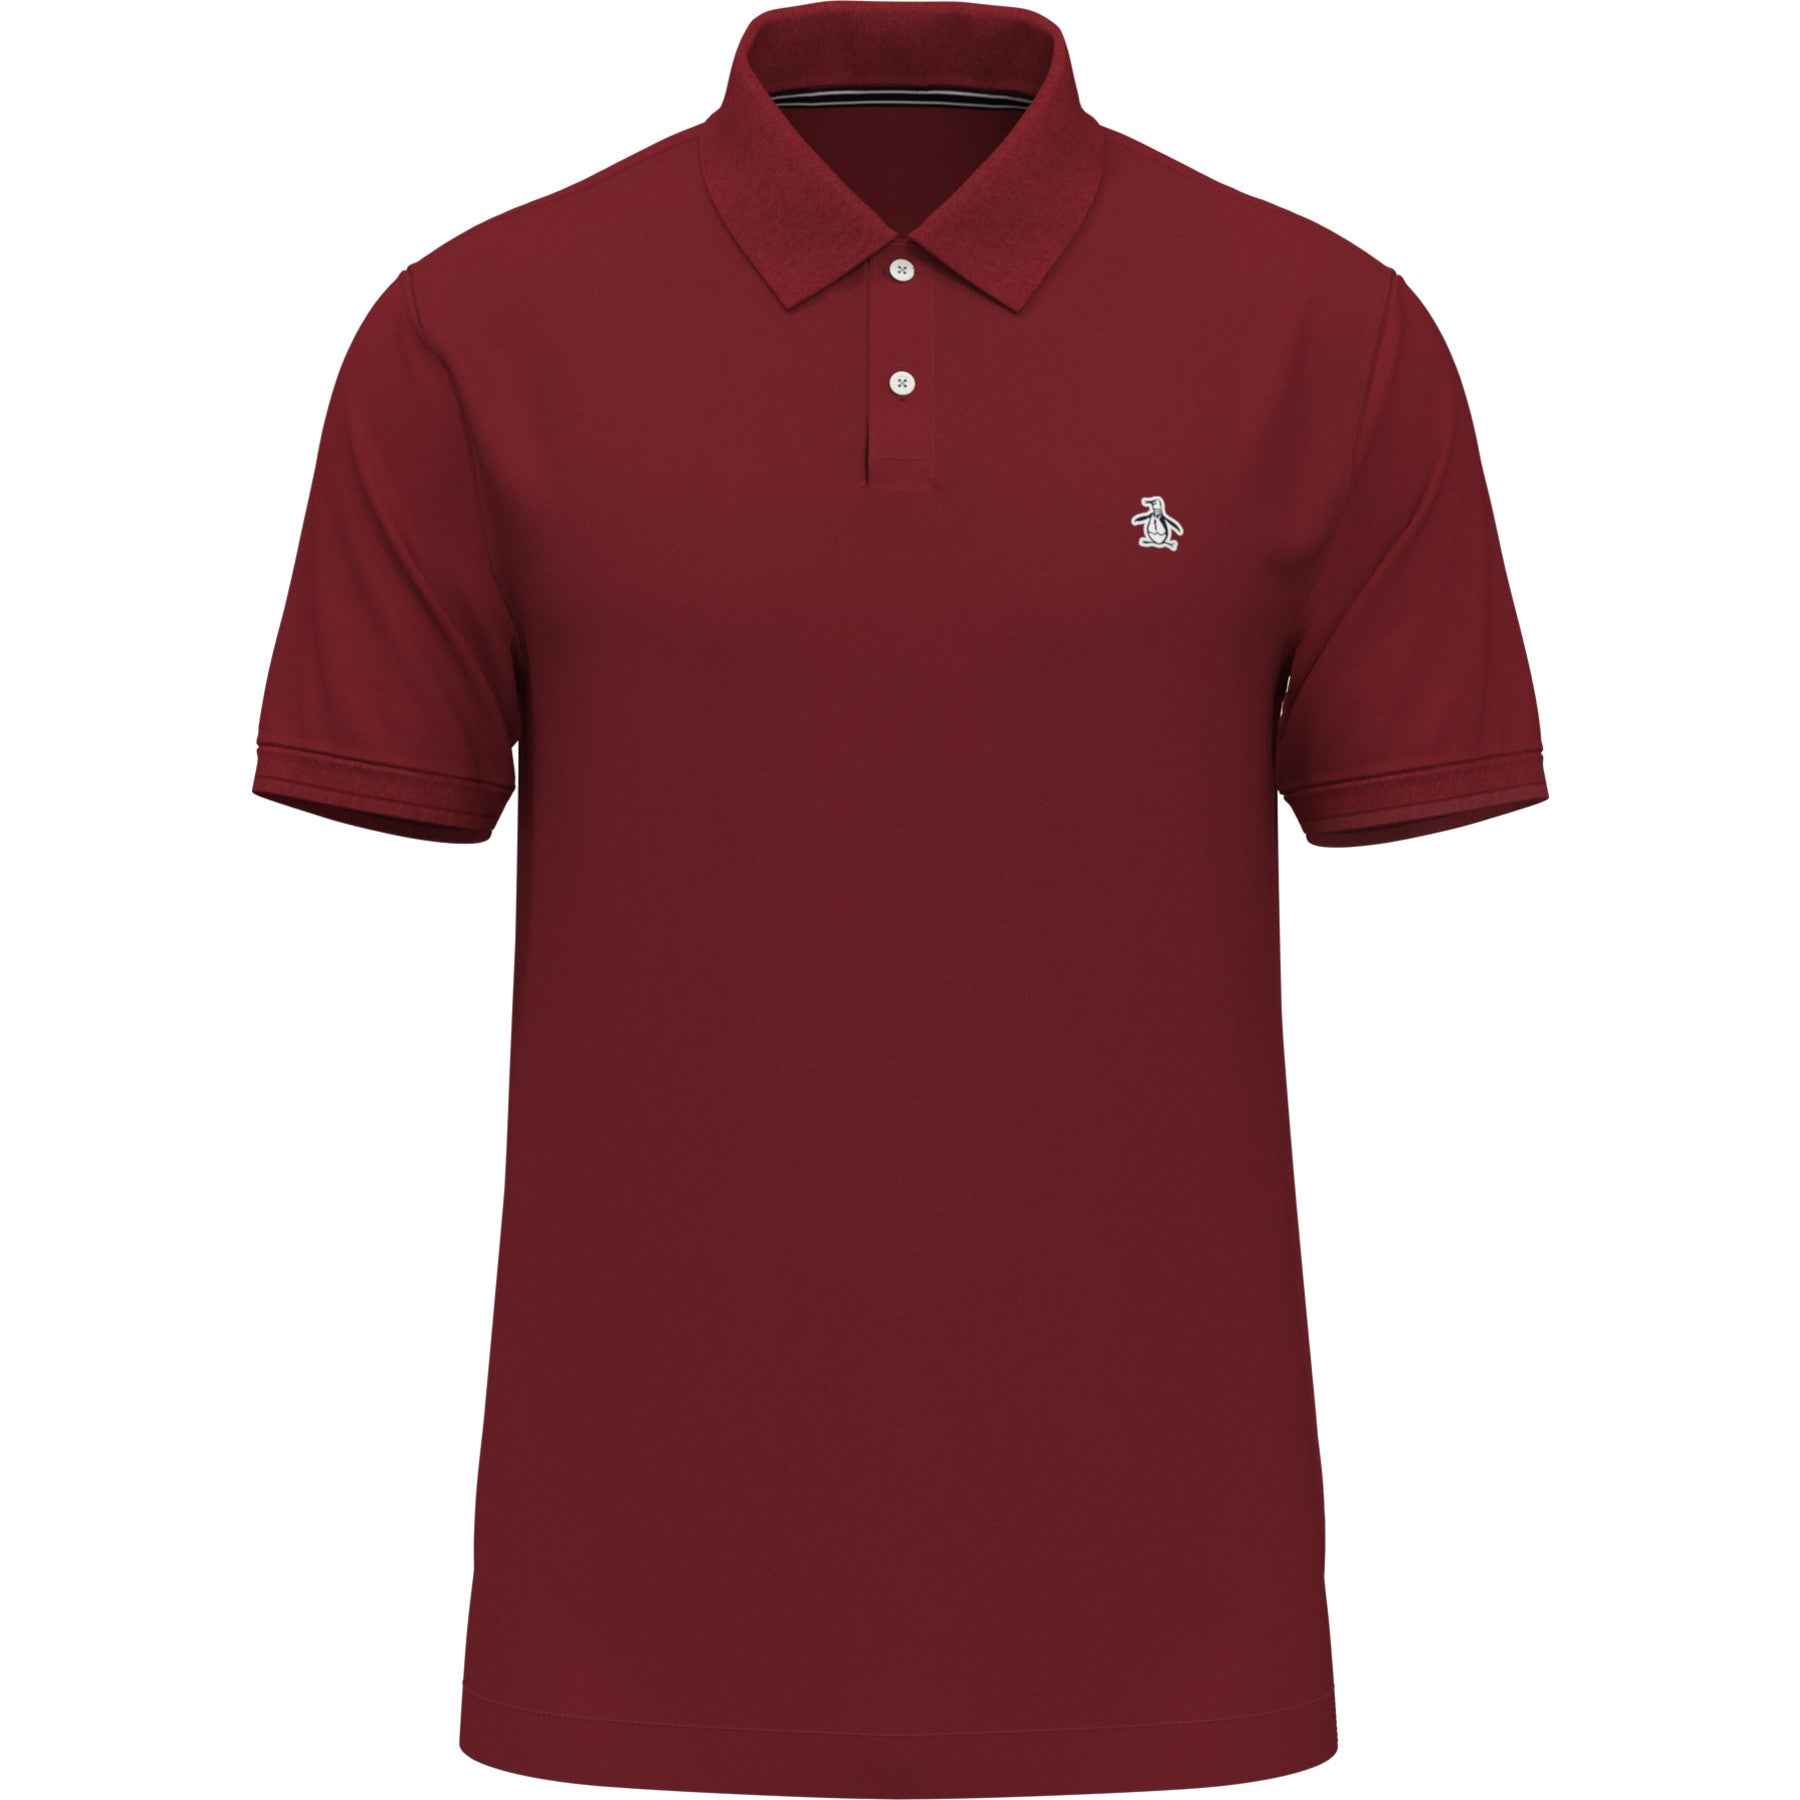 View Sticker Pete Daddy Polo Shirt In Red Dahlia information